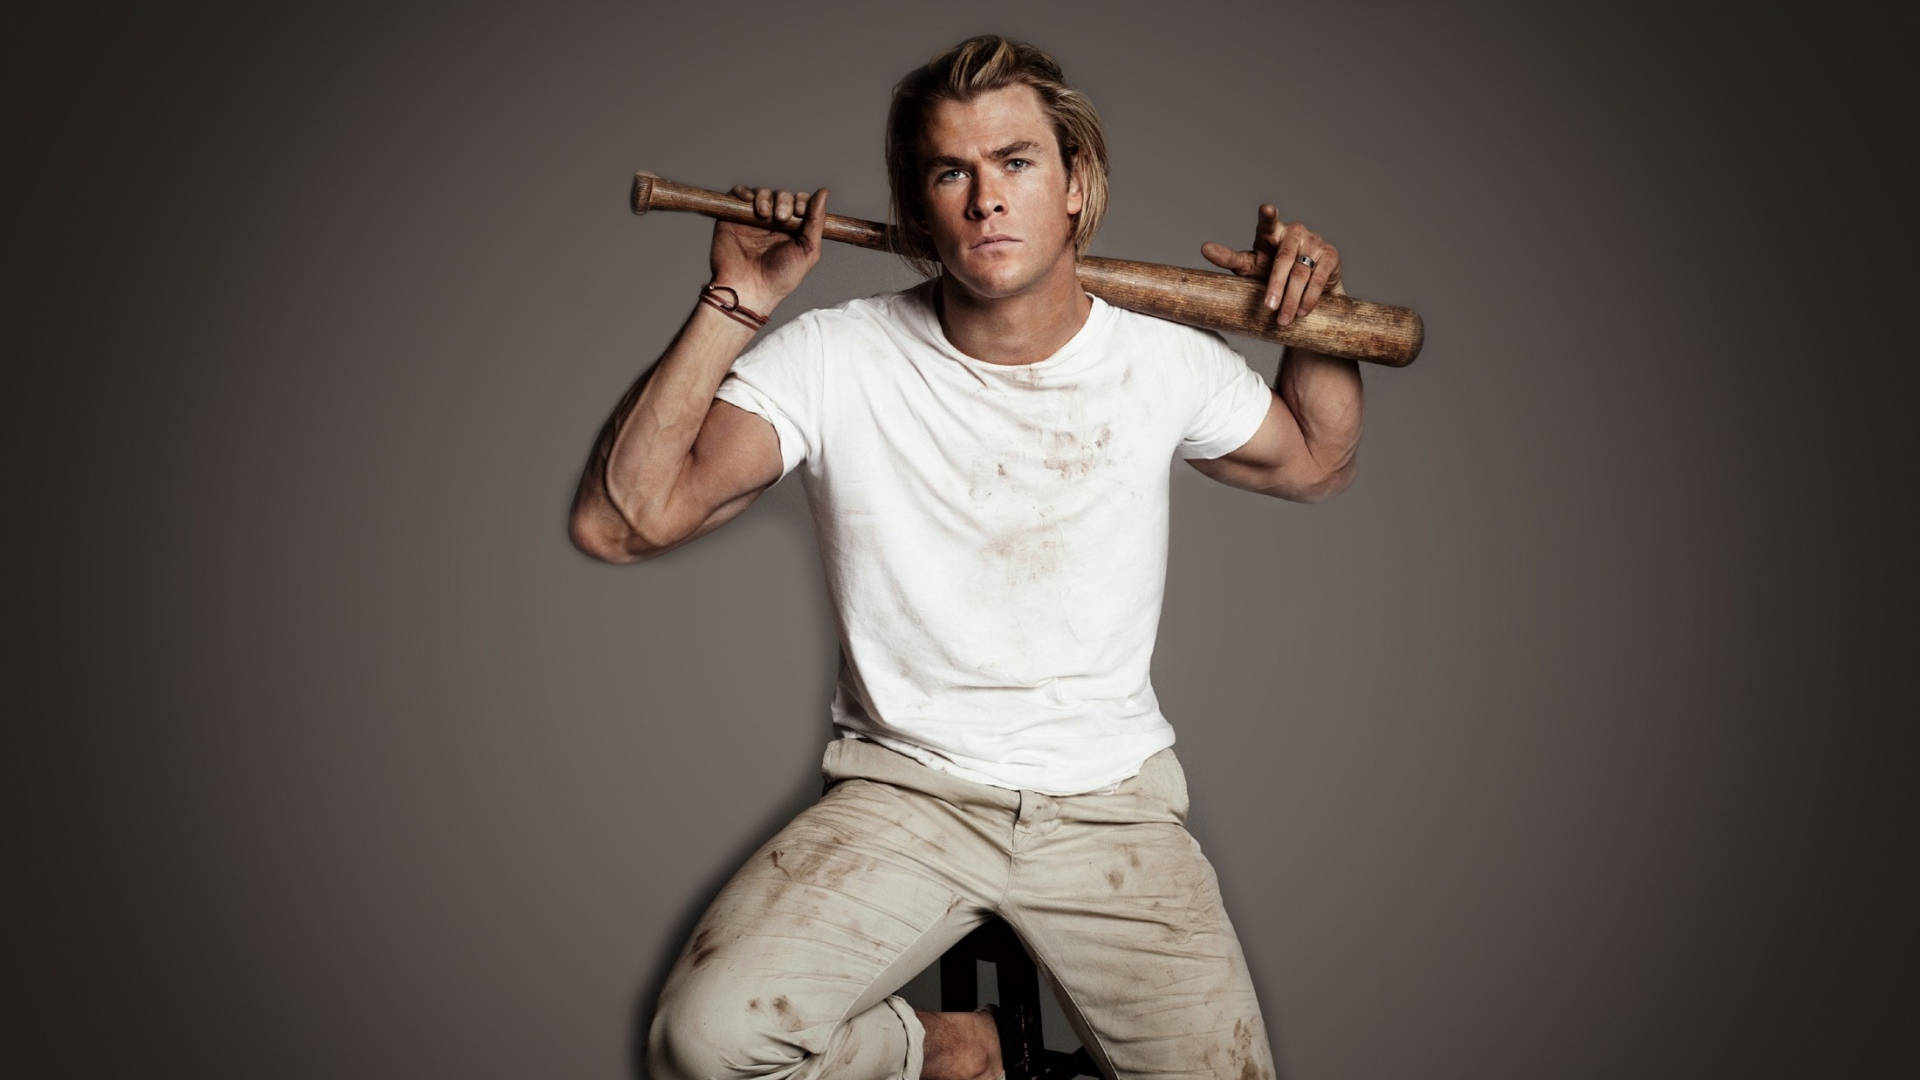 Chris Hemsworth, star of Thor and the Avengers series, holds a bat. Wallpaper